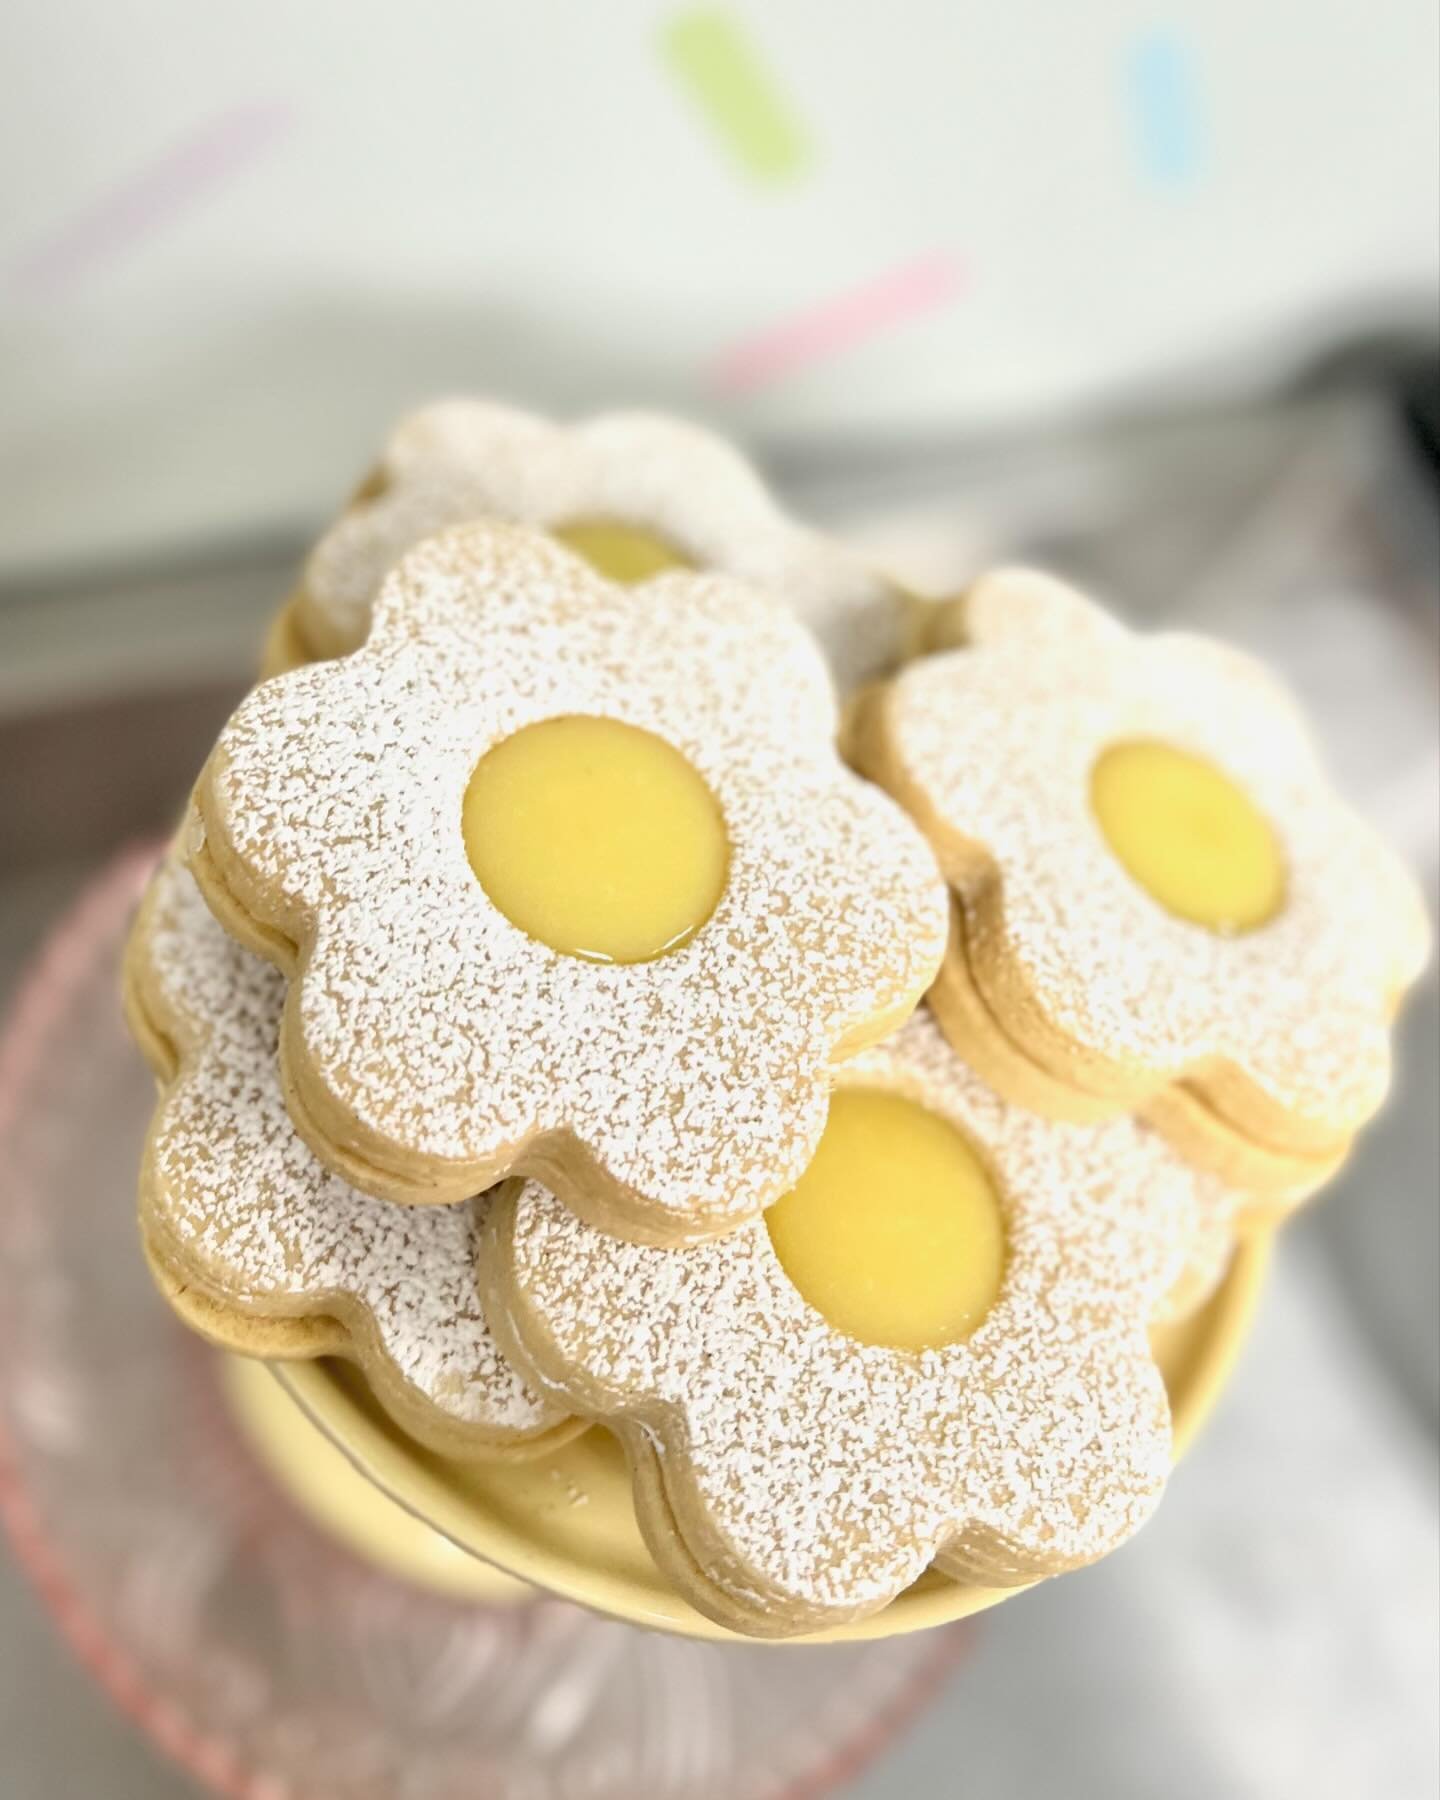 🍋 🌼

These lemon daisies are back again for Mother&rsquo;s Day!

Our signature Vanilla sugar cookies filled with a zingy lemon curd.

Pre-order now on our website, or share the link with someone so you can be surprised on Mother&rsquo;s Day&hellip;